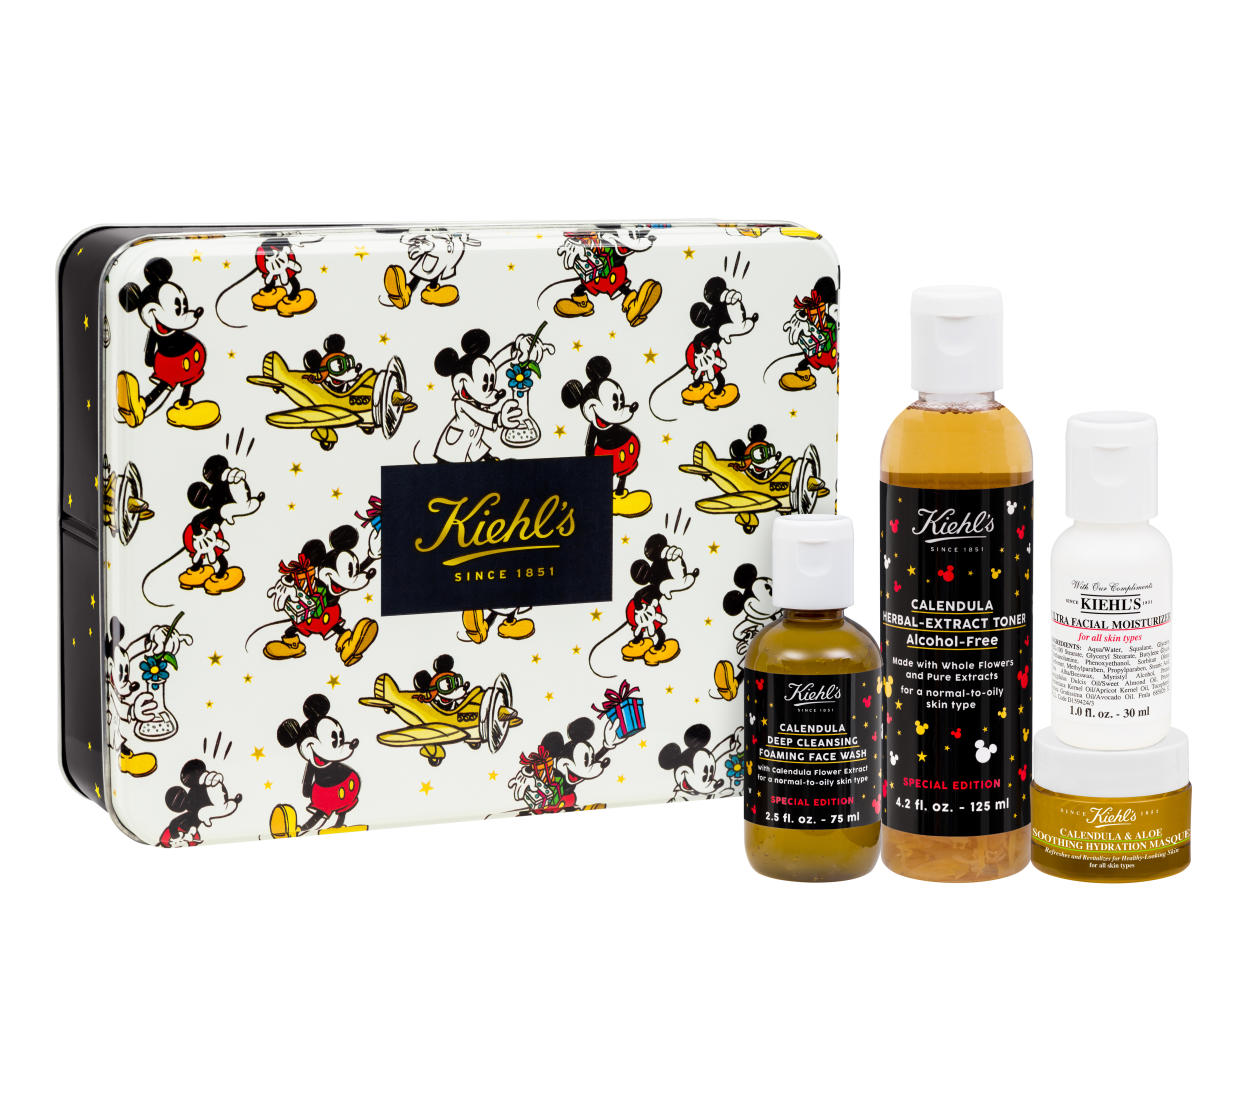 Kiehl’s is teaming up with Disney on the cutest Mickey Mouse-inspired collection